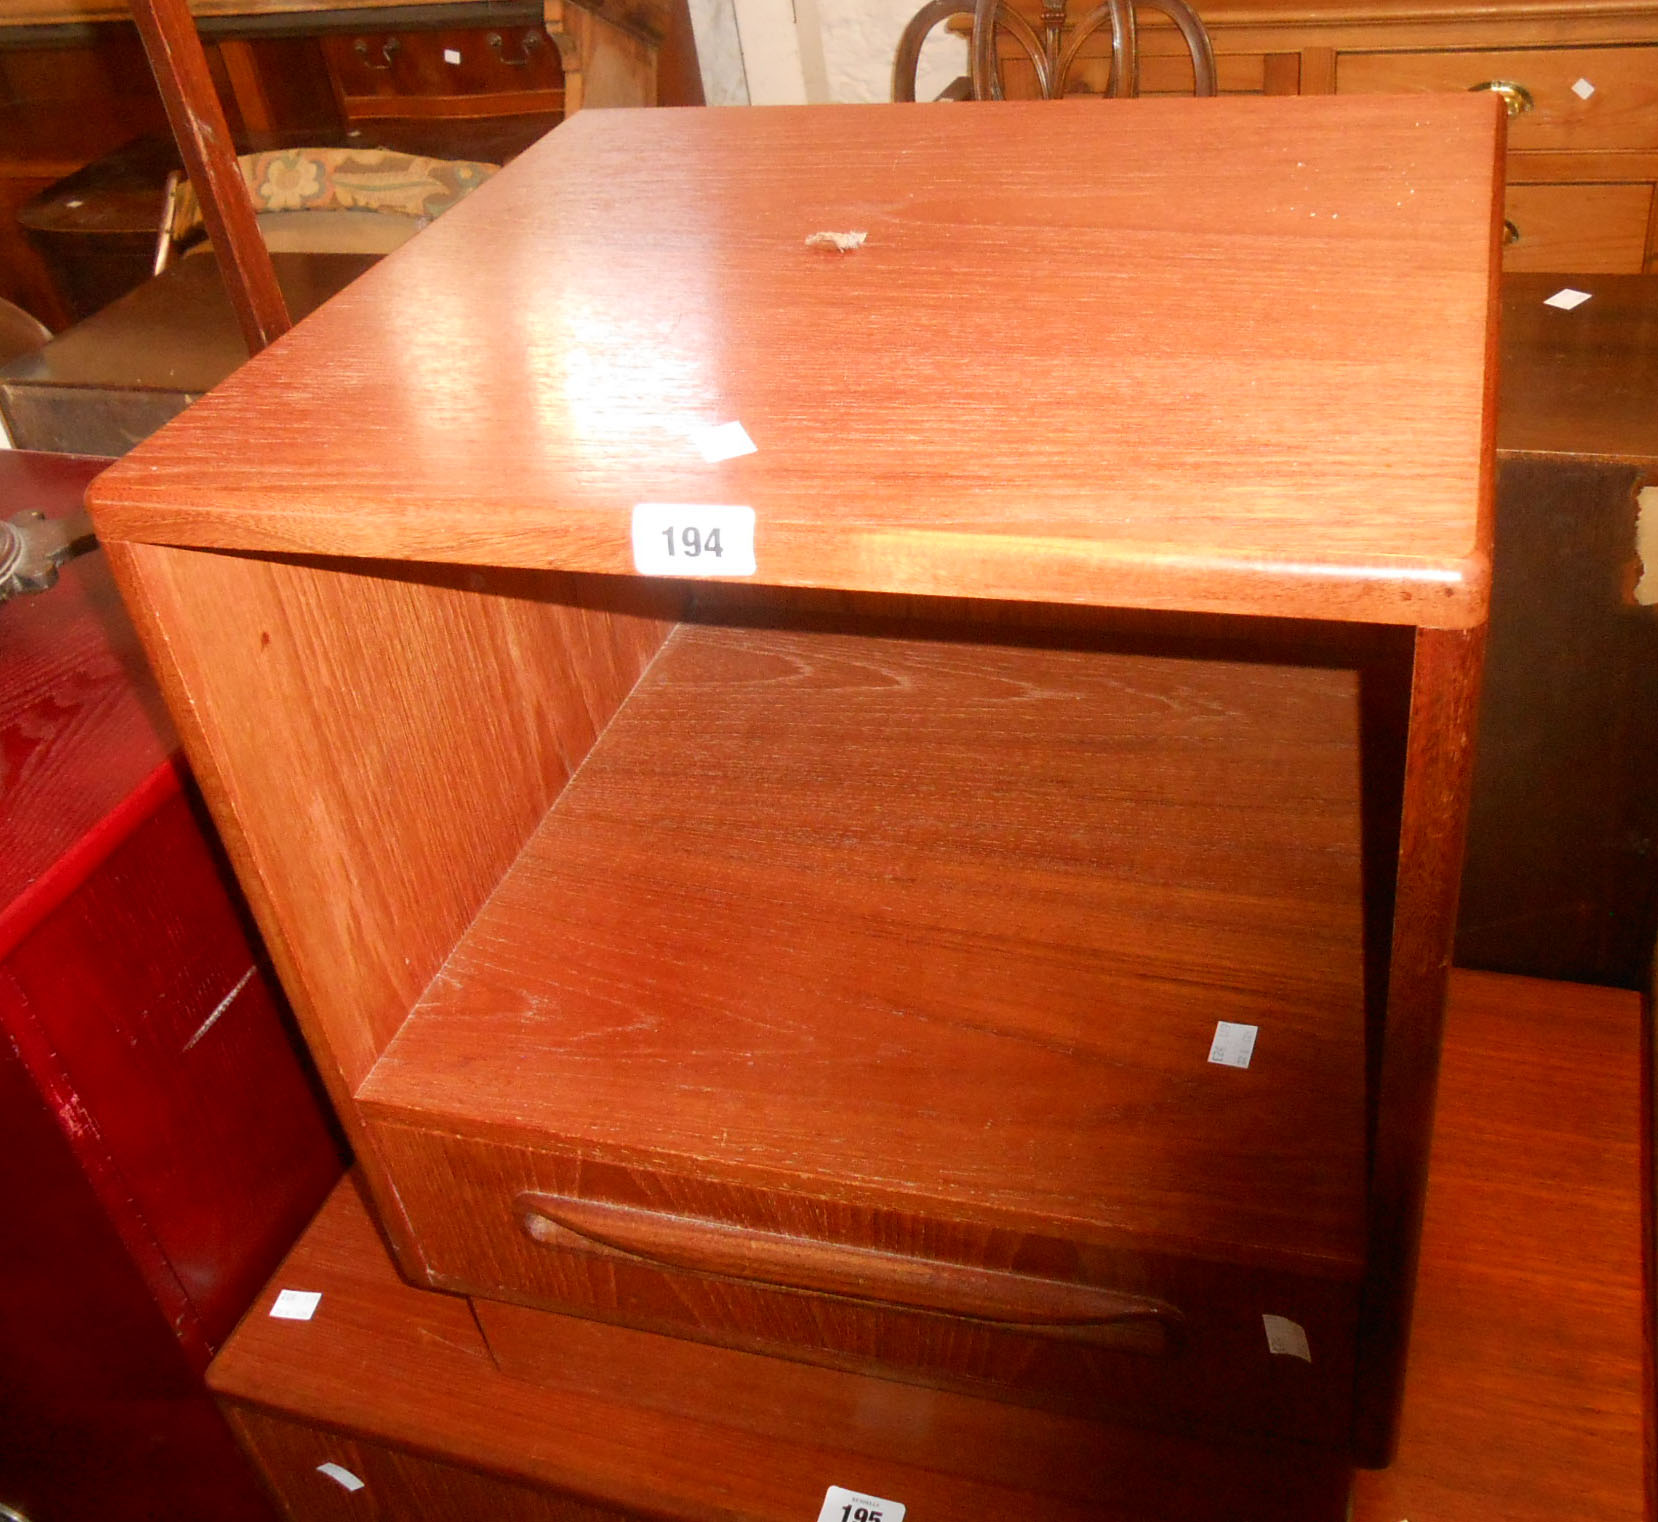 A 46cm retro G Plan "Fresco" teak and mixed wood bedside unit with recess and drawer under, set on